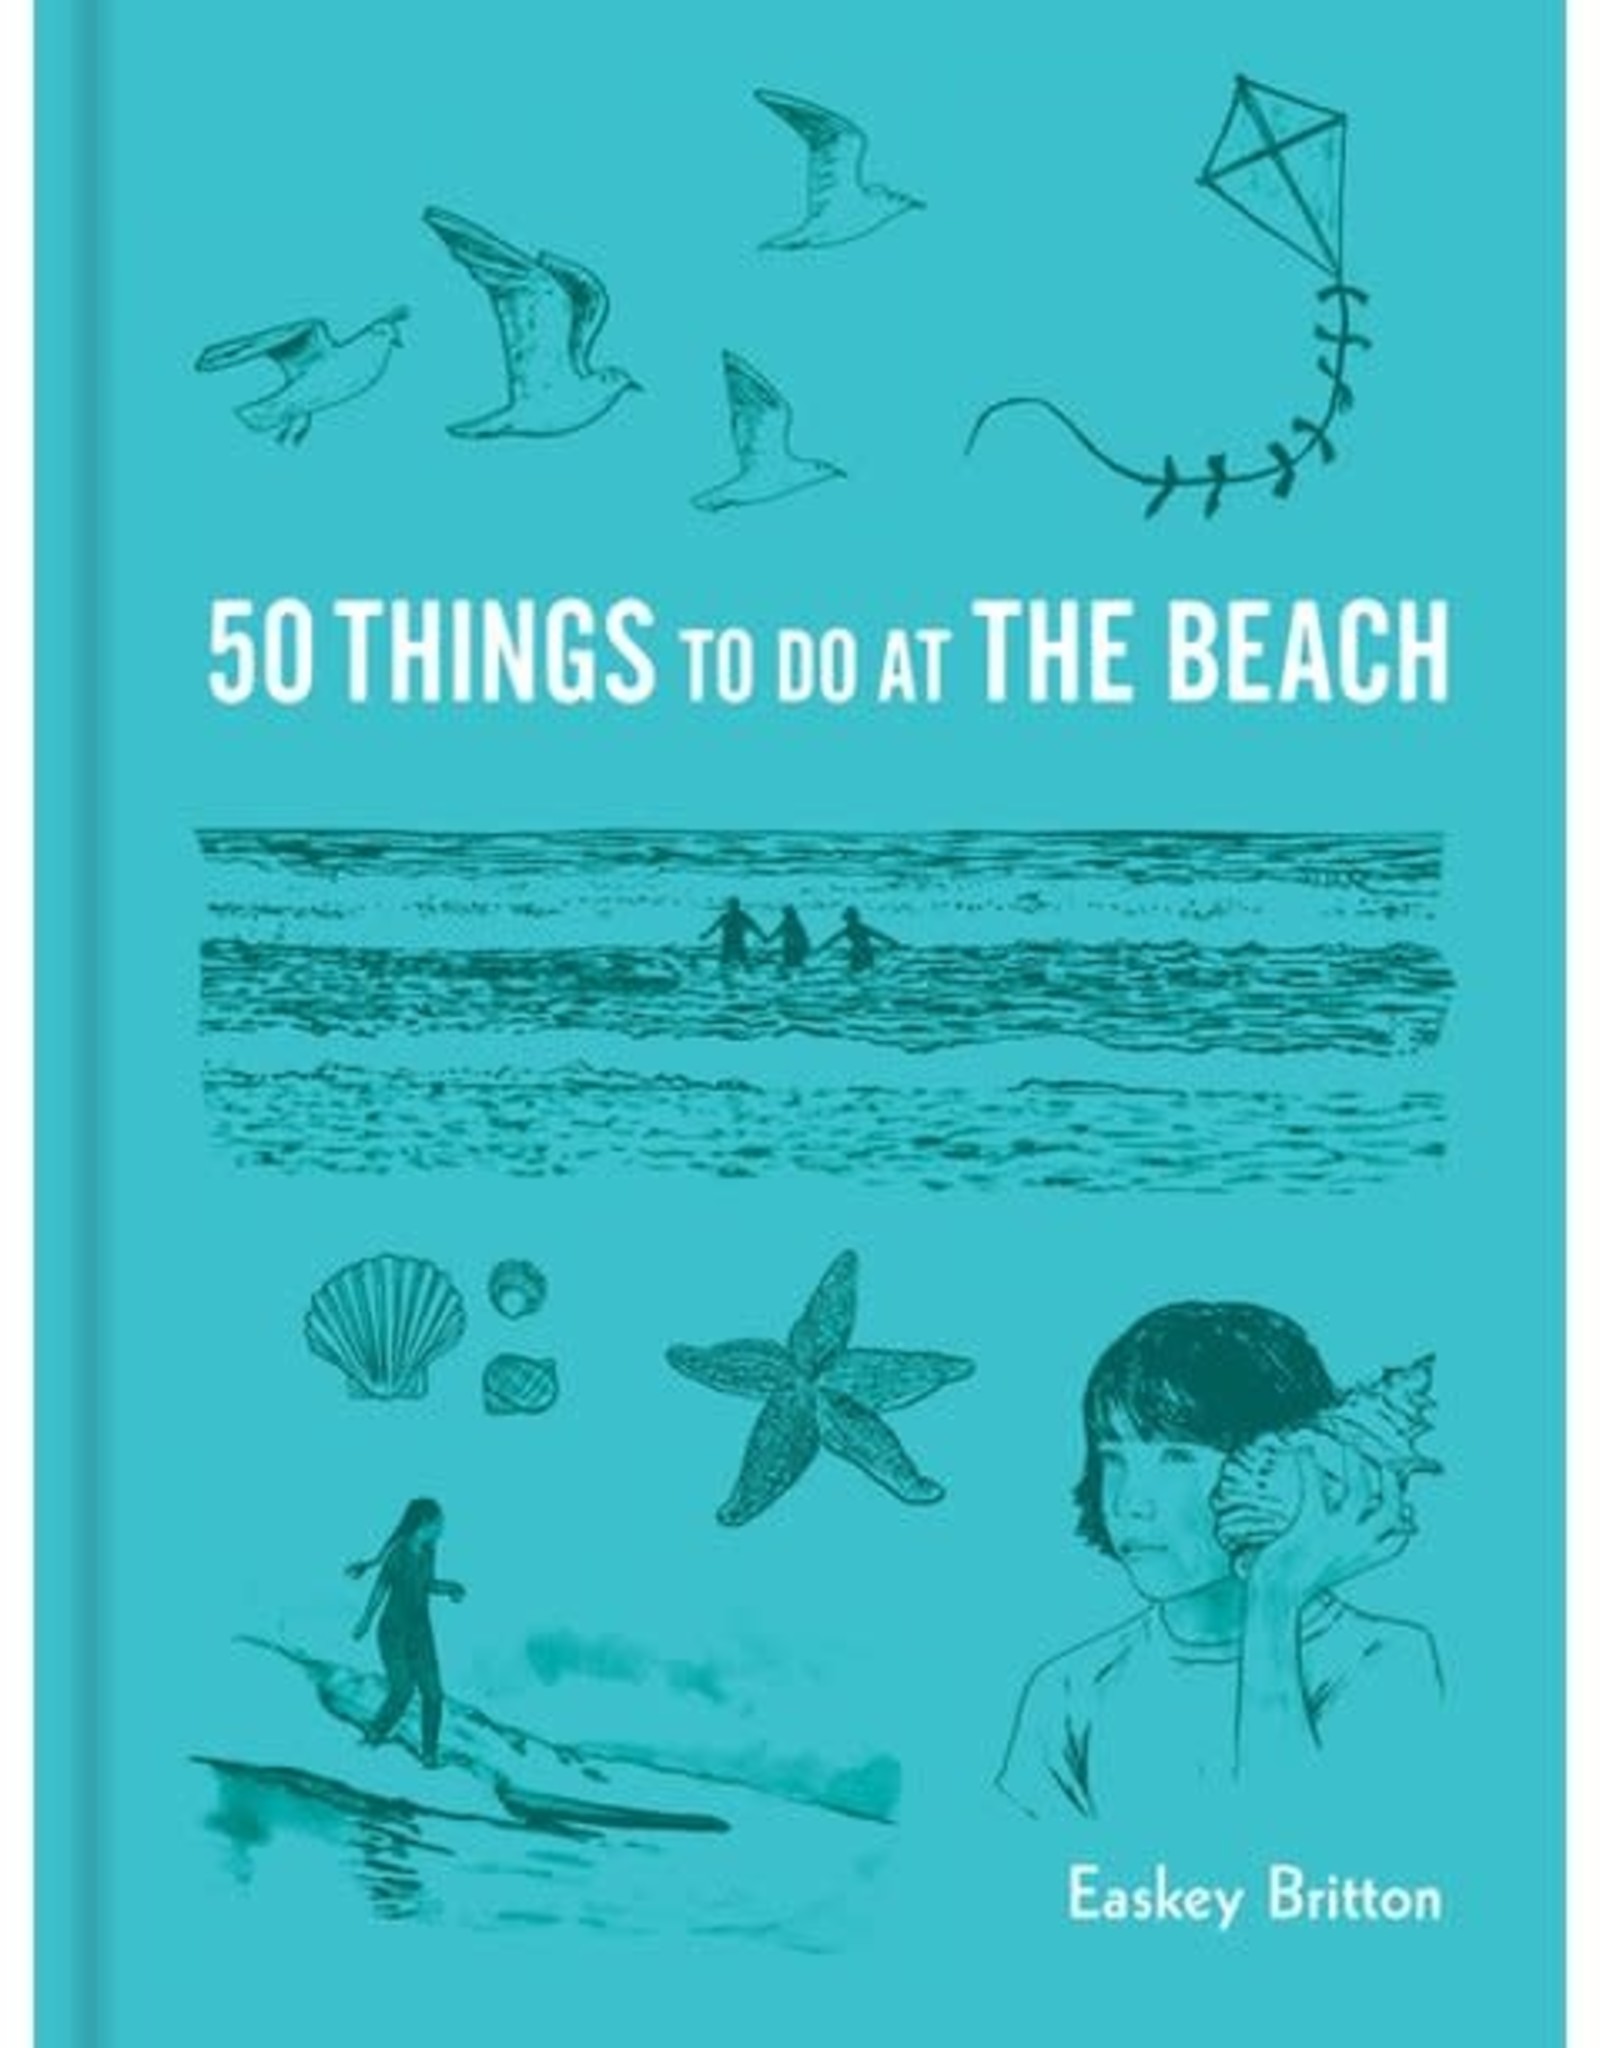 50 Things to Do at the Beach